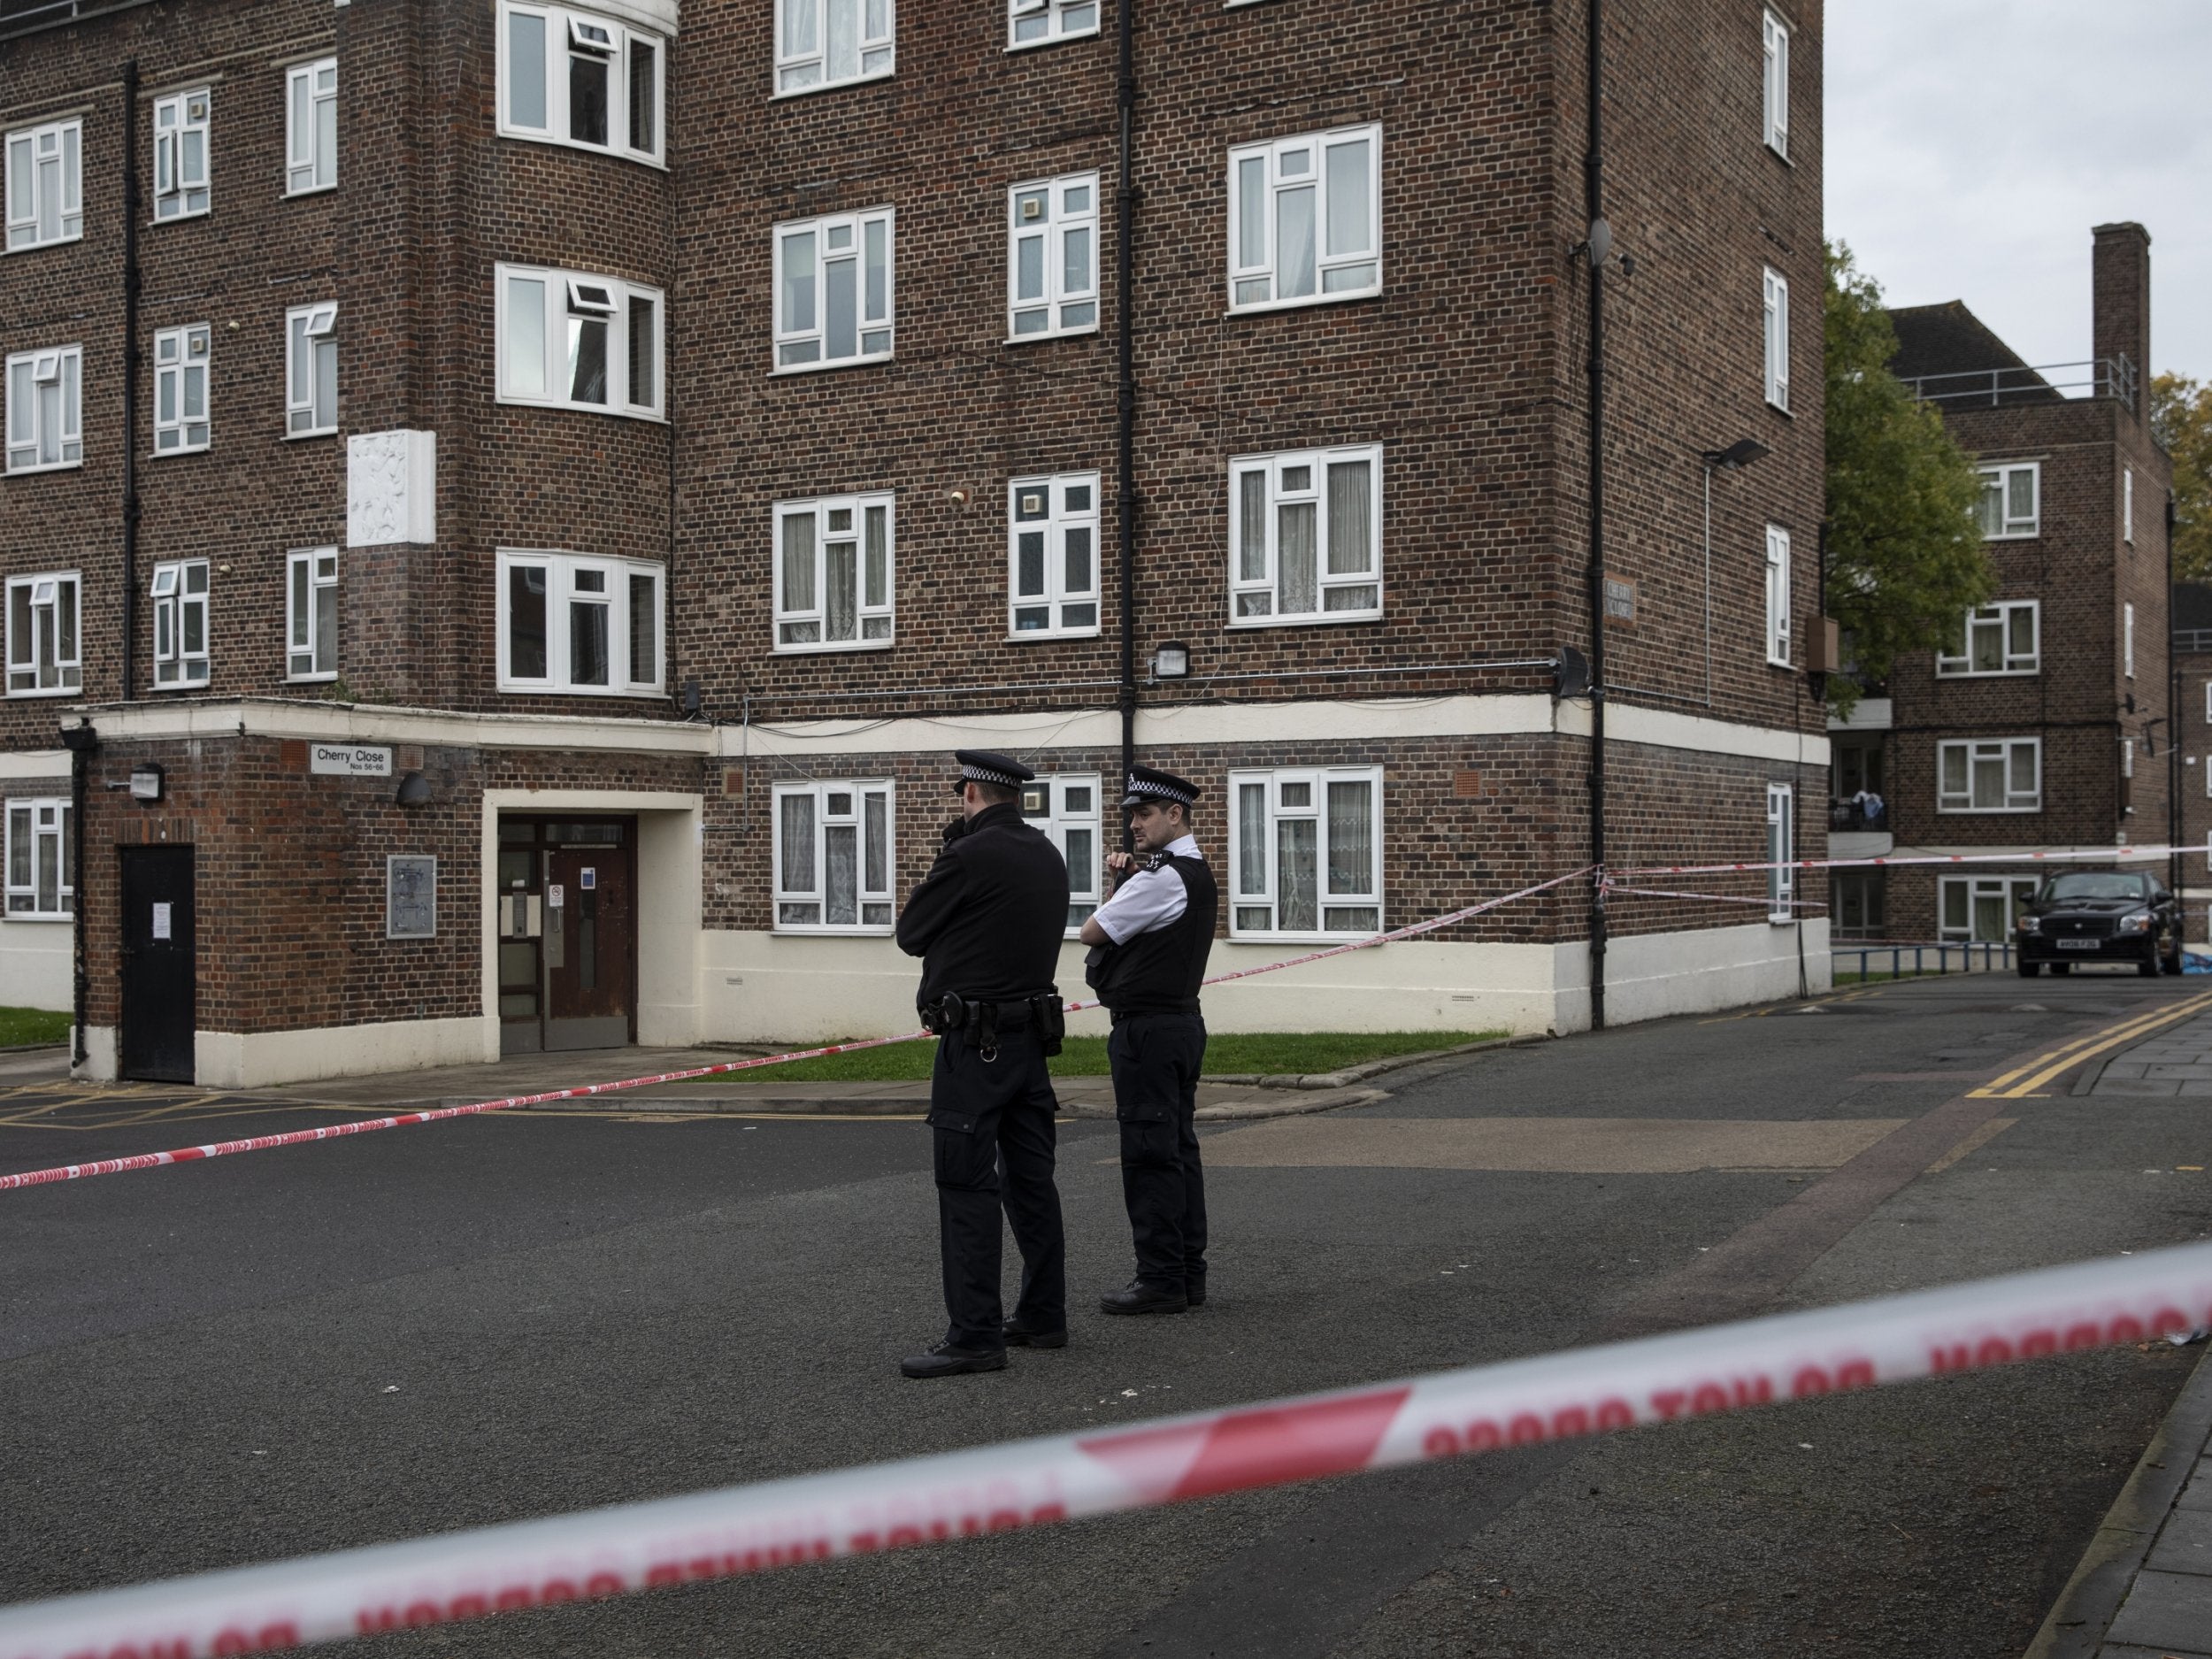 Police at Tulse Hill, where a 16-year-old was fatally stabbed